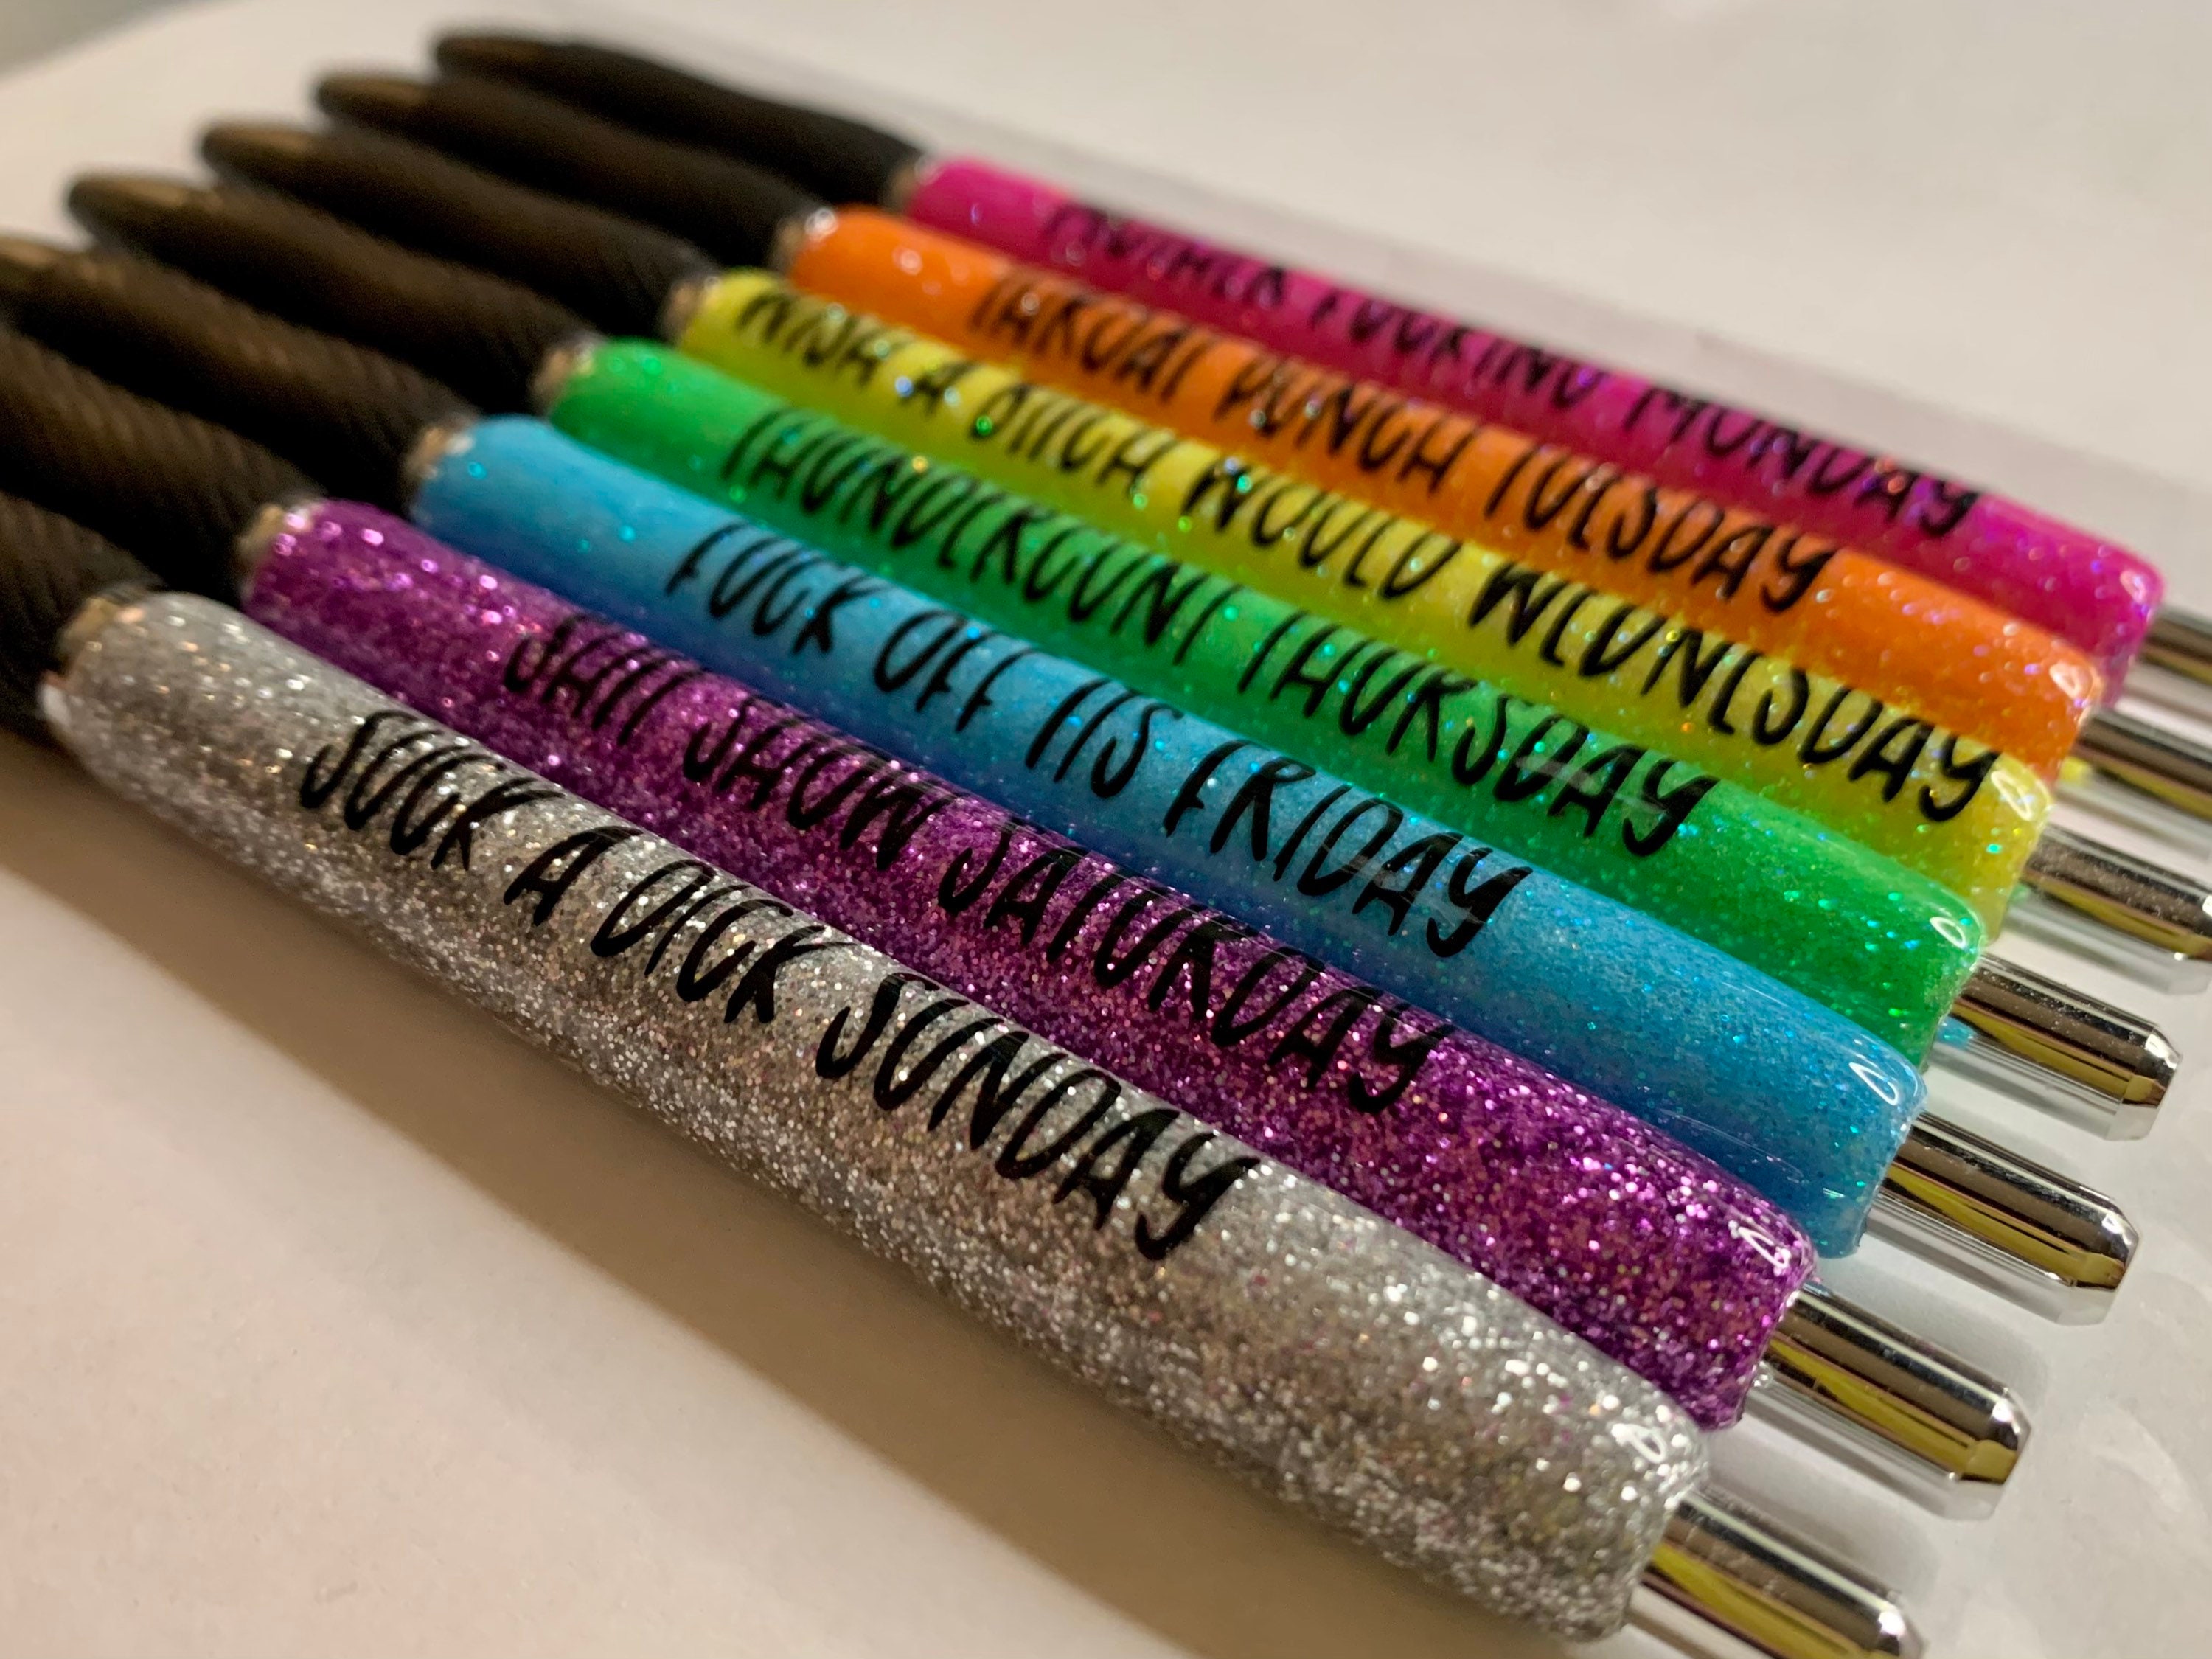 Swear Word Pens/Cuss Words/Weekday Pens/Adult Sassy Days of the Week  Glitter set of 7